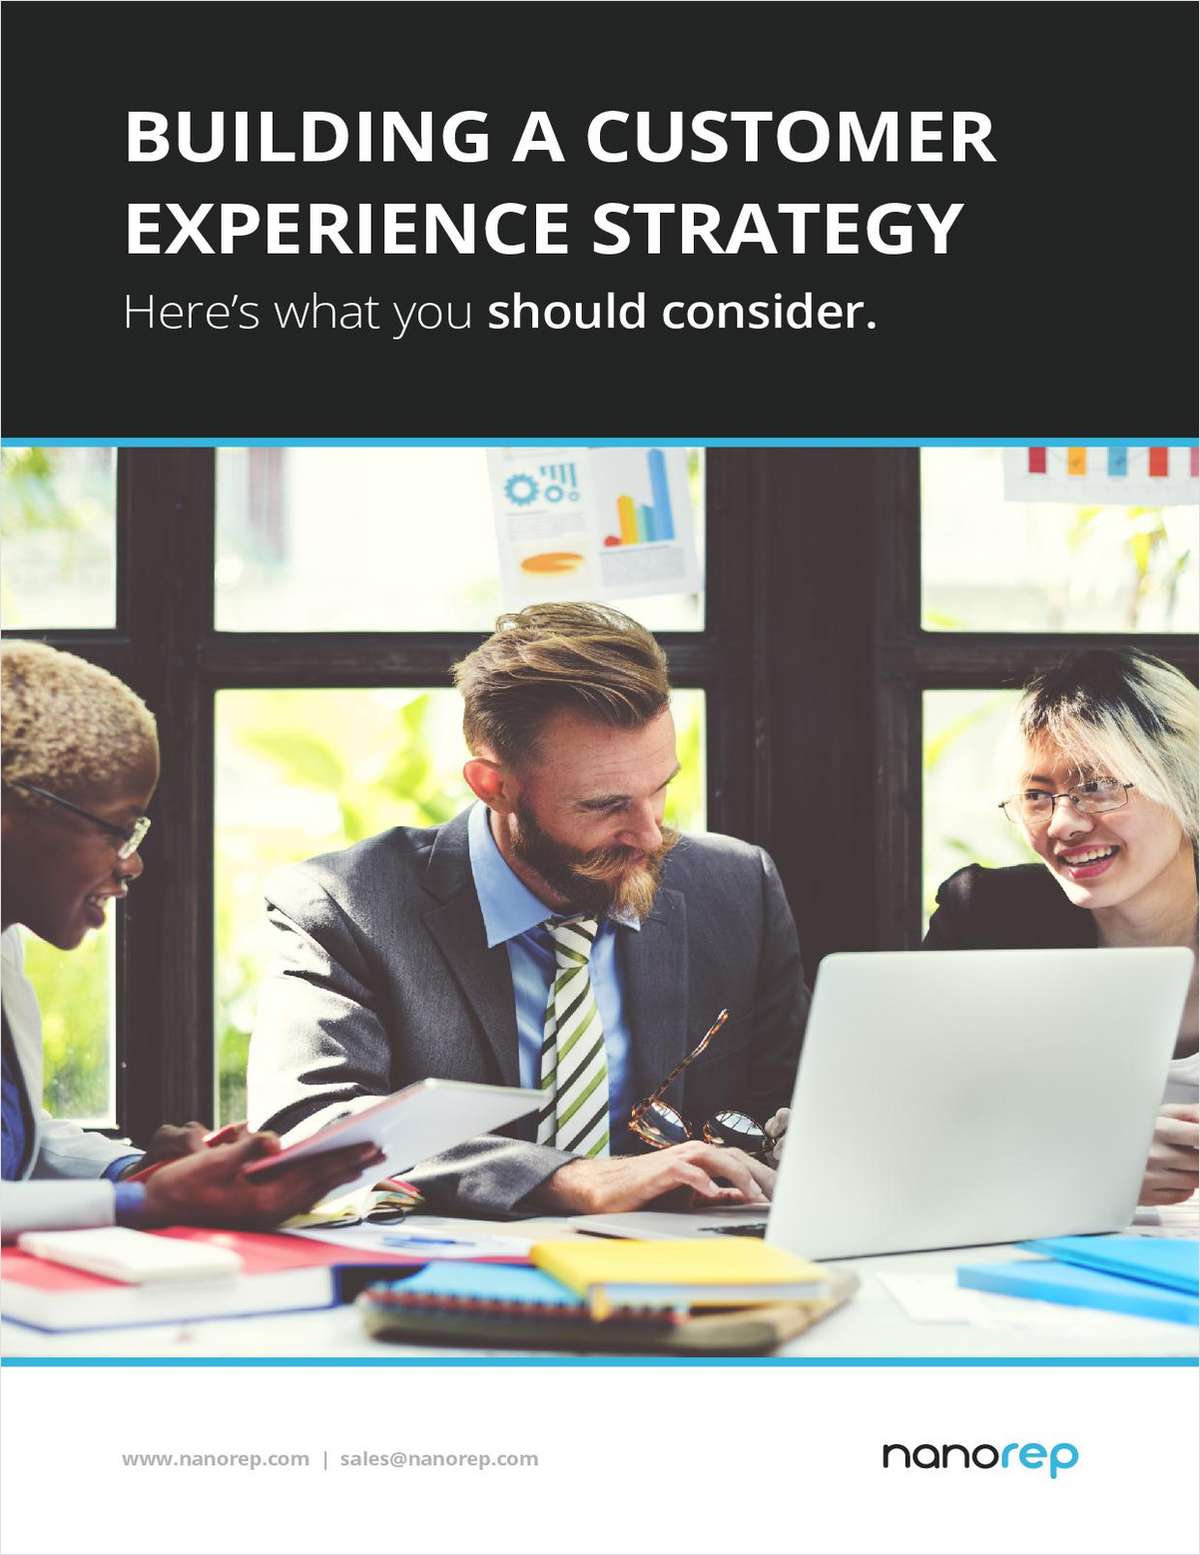 Building a Customer Experience Strategy